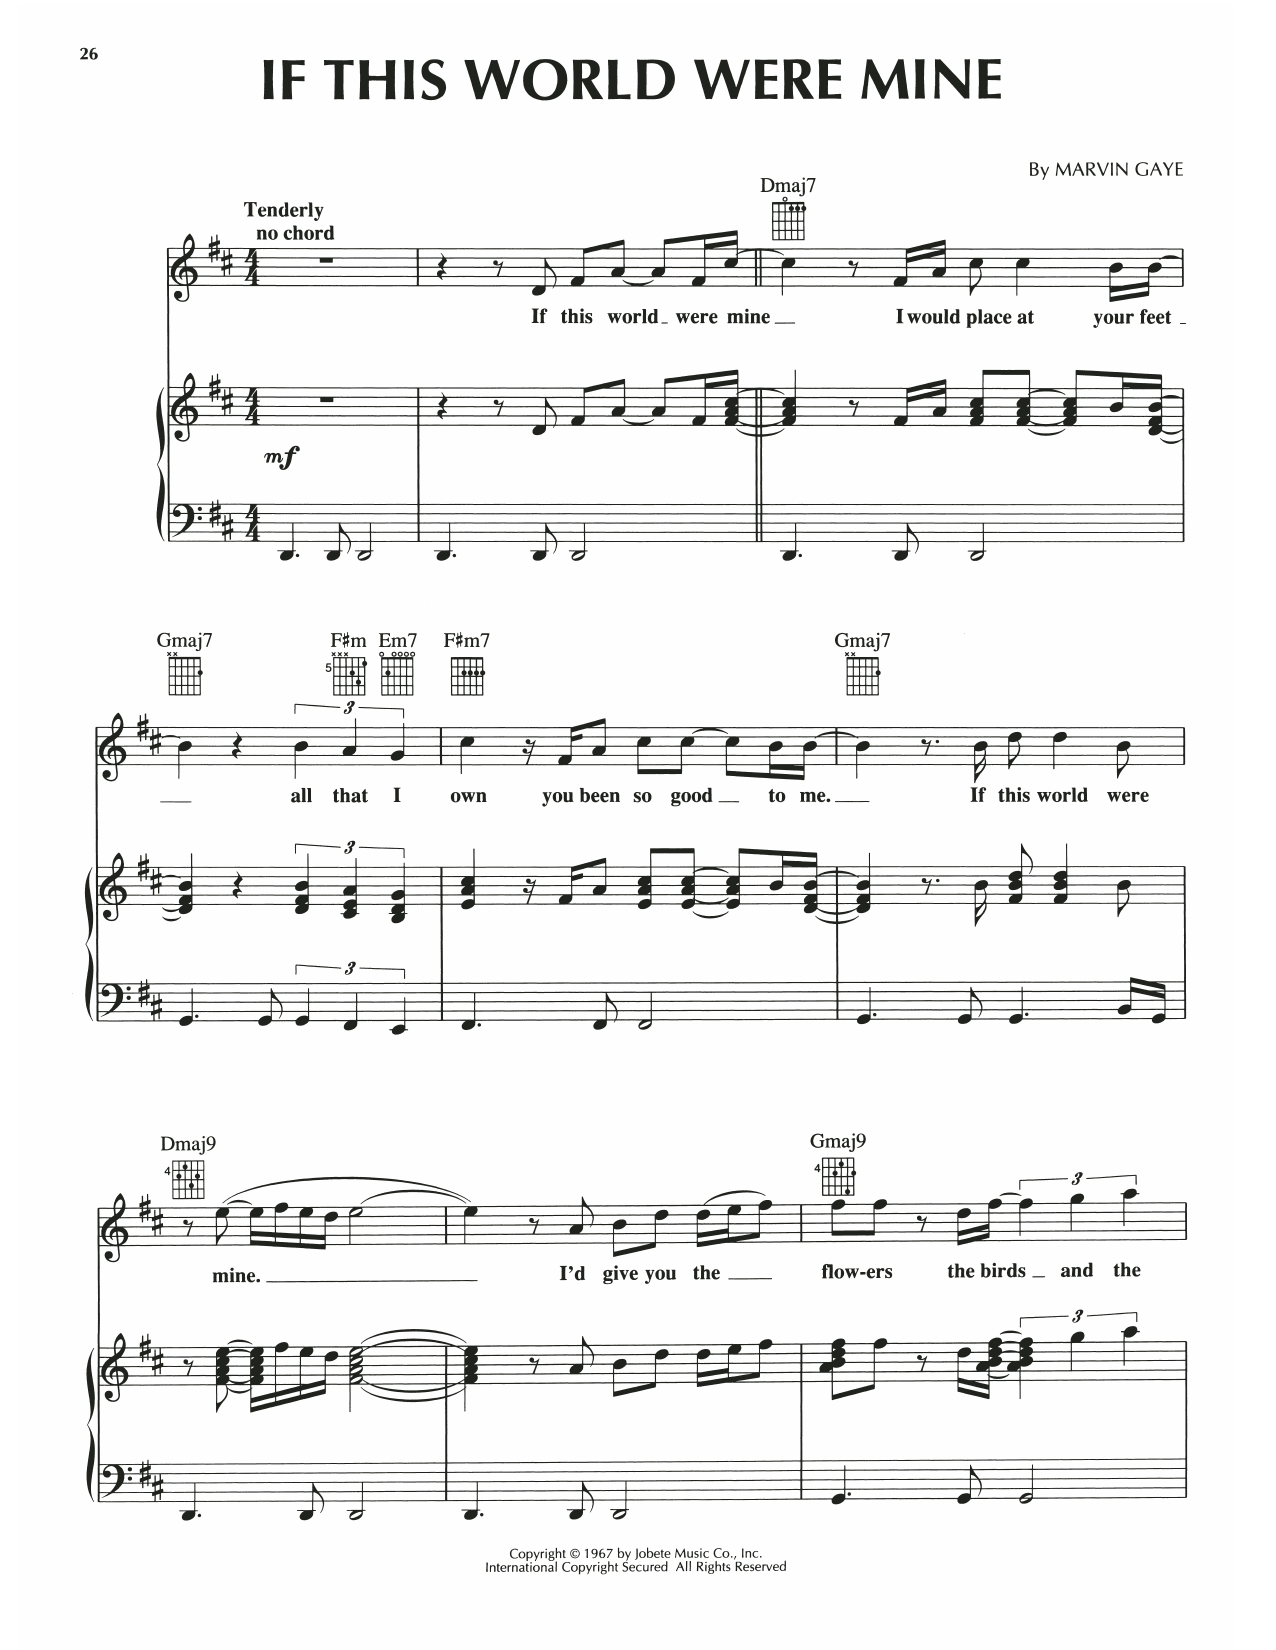 Download Luther Vandross and Cheryl Lynn If This World Were Mine Sheet Music